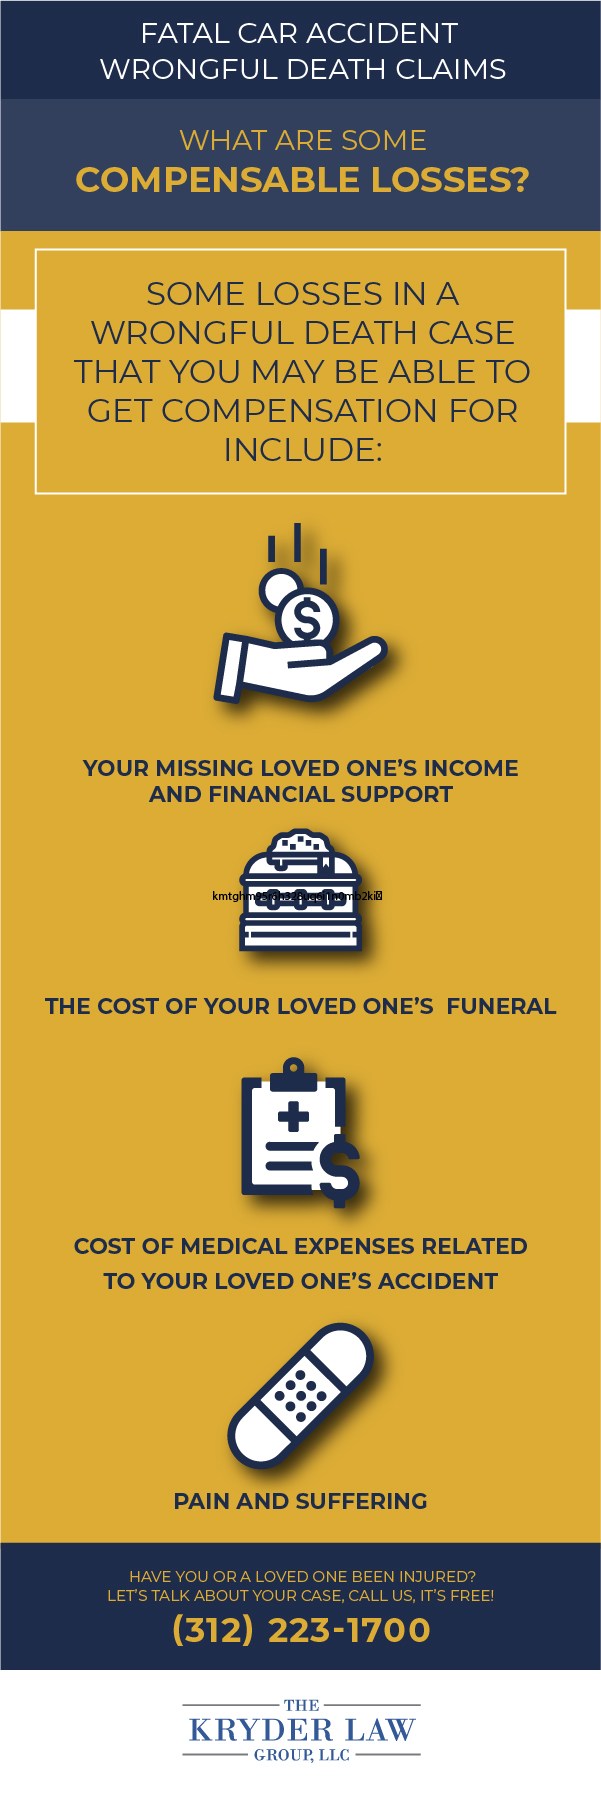 Types of Compensation for a Fatal Car Accident Infographic